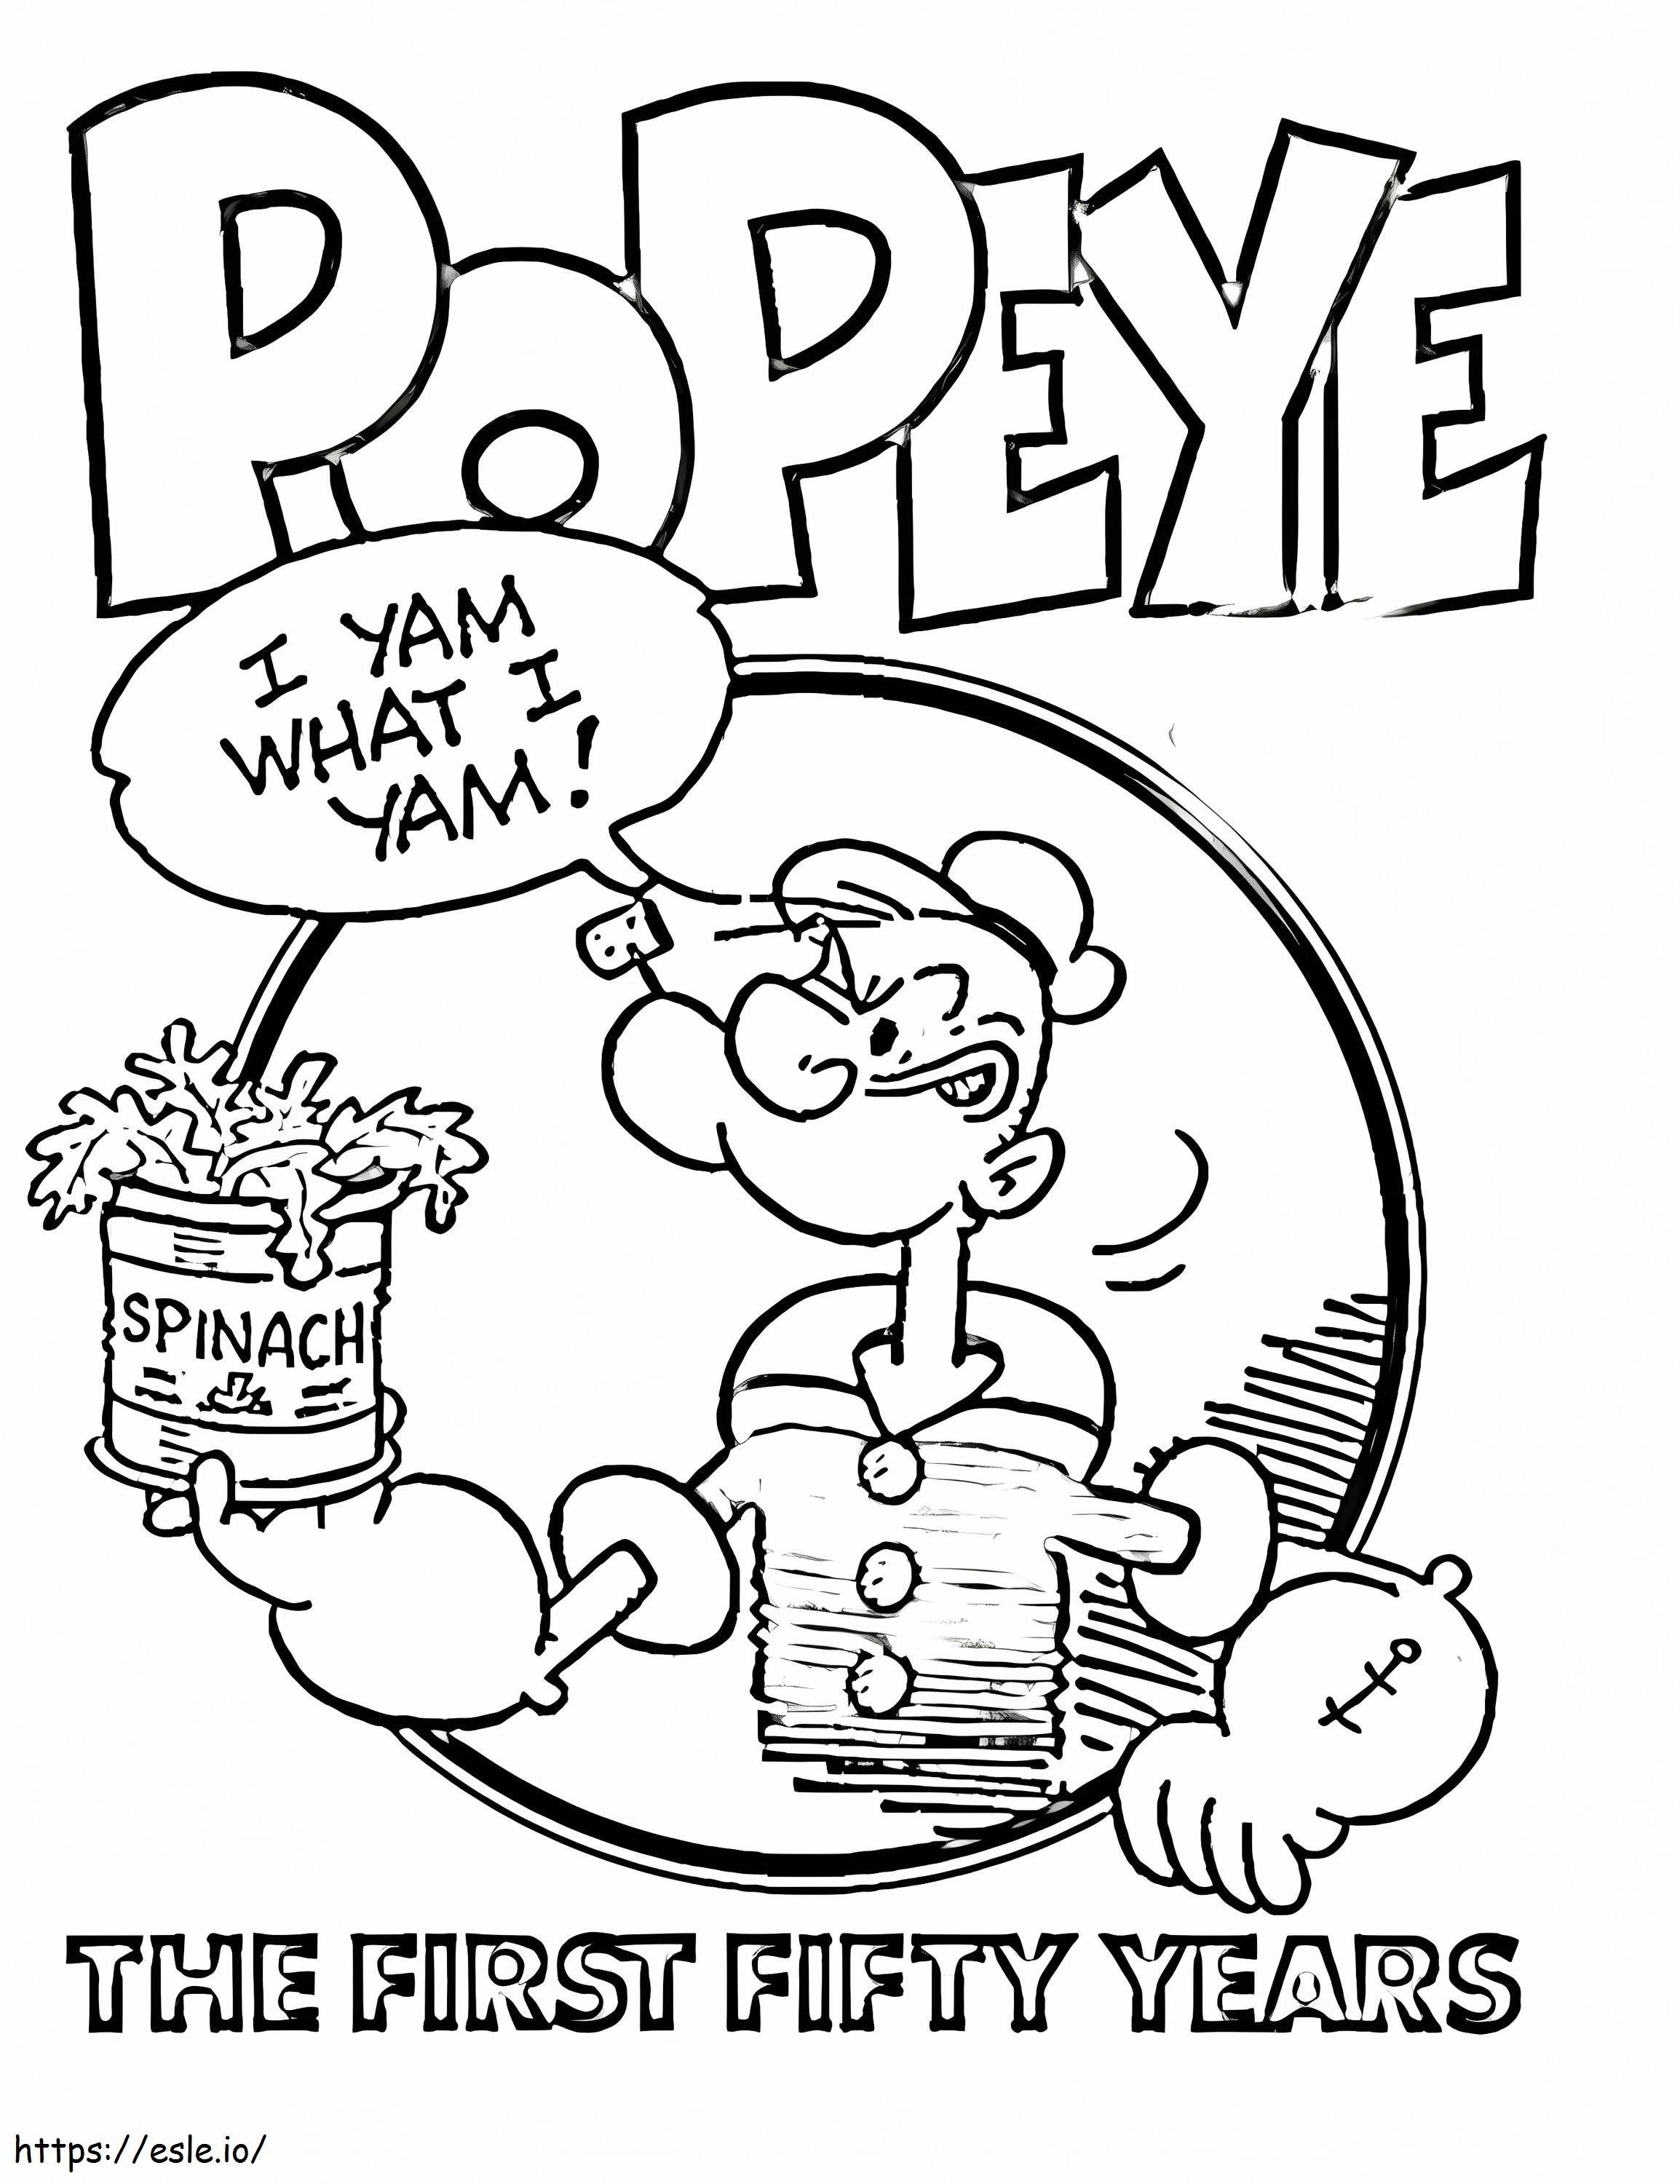 Popeye Holding Spinach coloring page